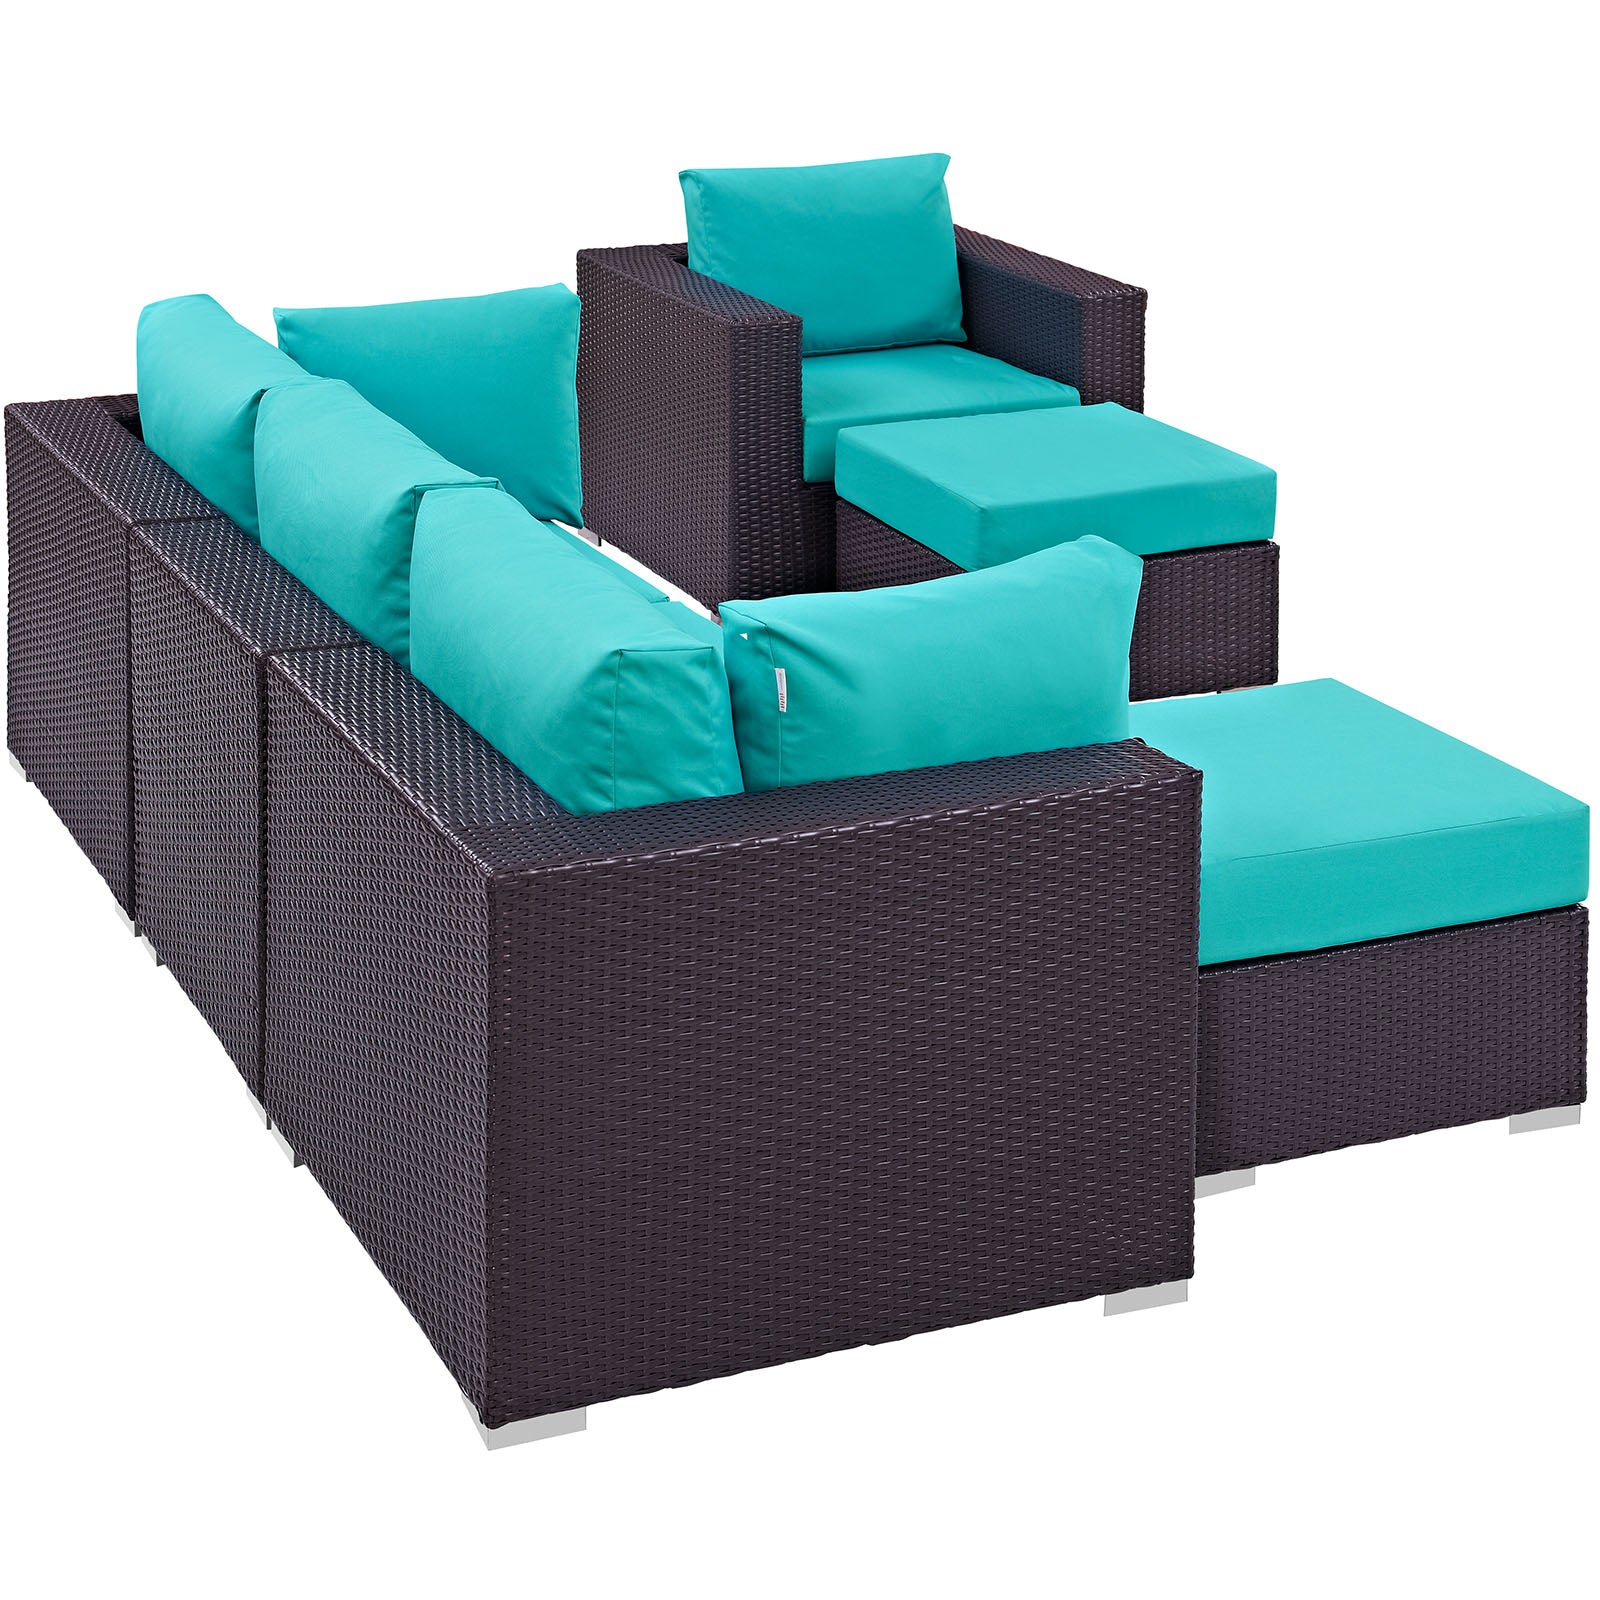 Modway Outdoor Conversation Sets - Convene 6 Piece Outdoor Patio Sectional Set Turquoise